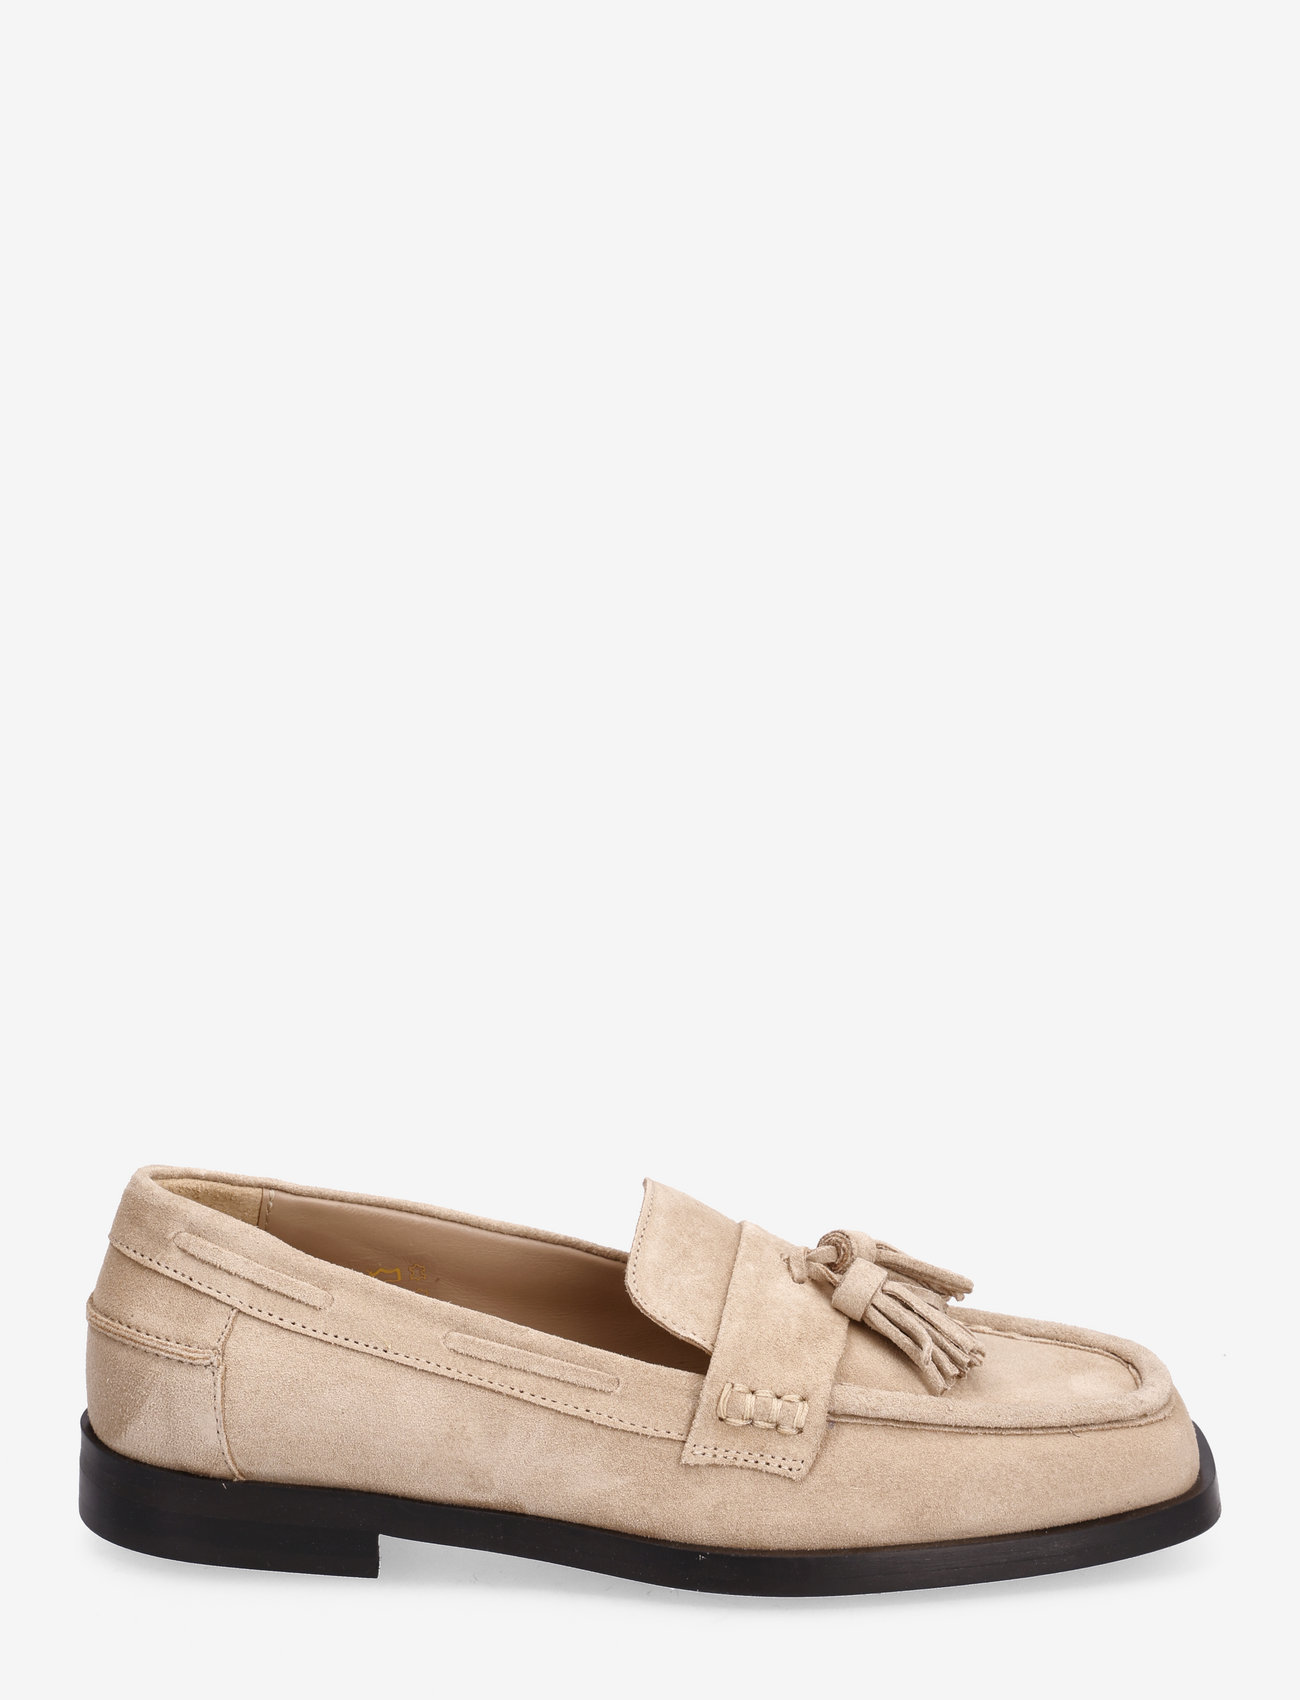 ANGULUS - Shoes - flat - birthday gifts - 2240 sand - 1